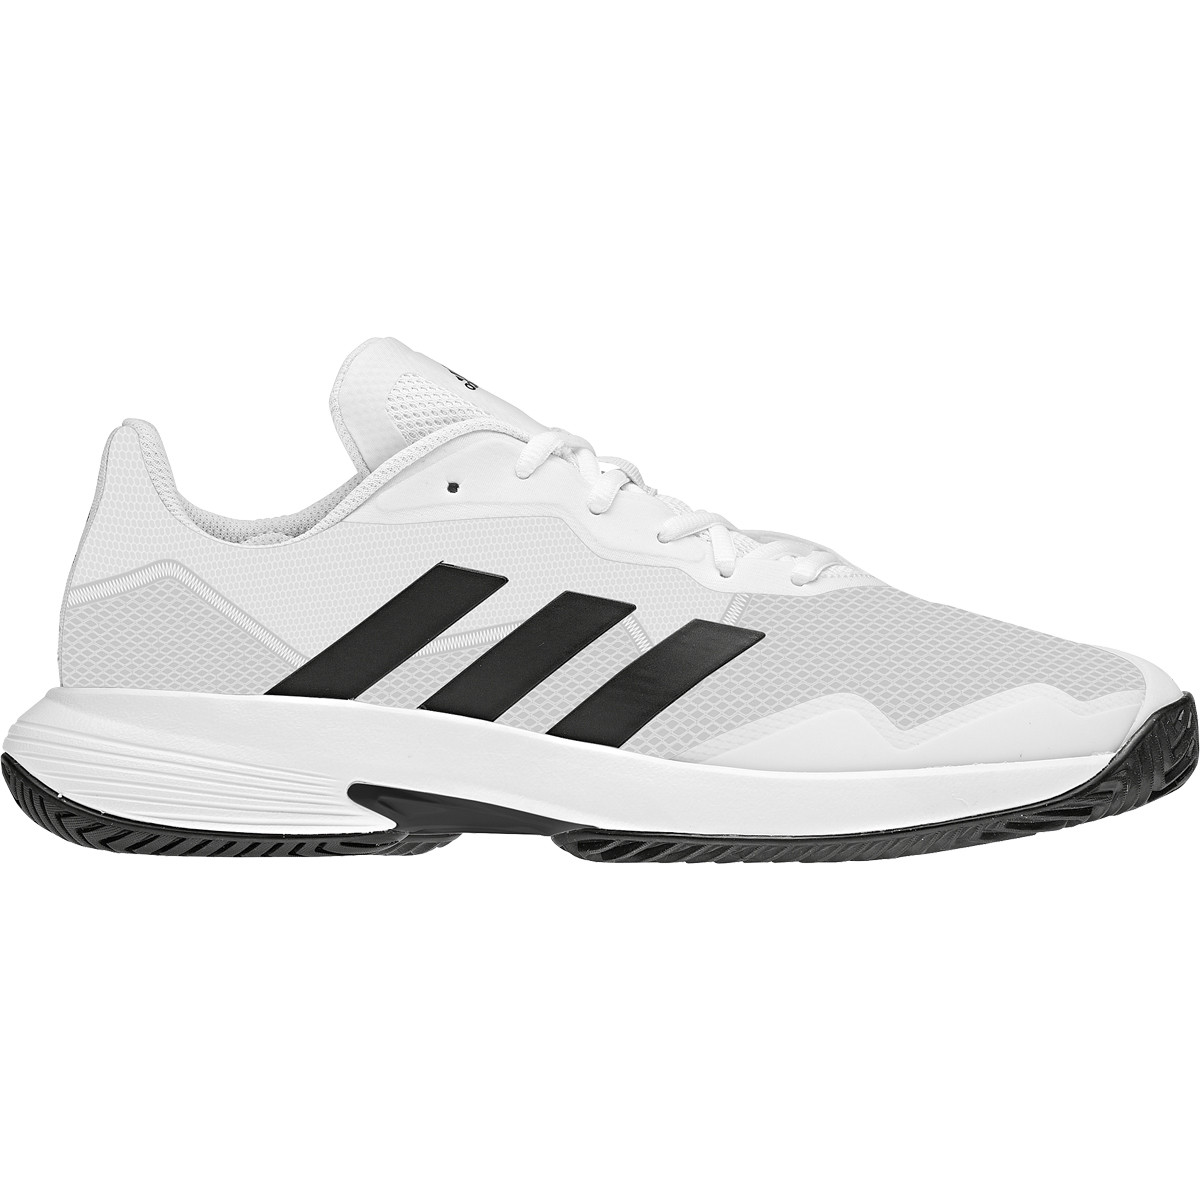 CHAUSSURES ADIDAS COURTJAM CONTROL TOUTES SURFACES - ADIDAS - Homme -  Chaussures